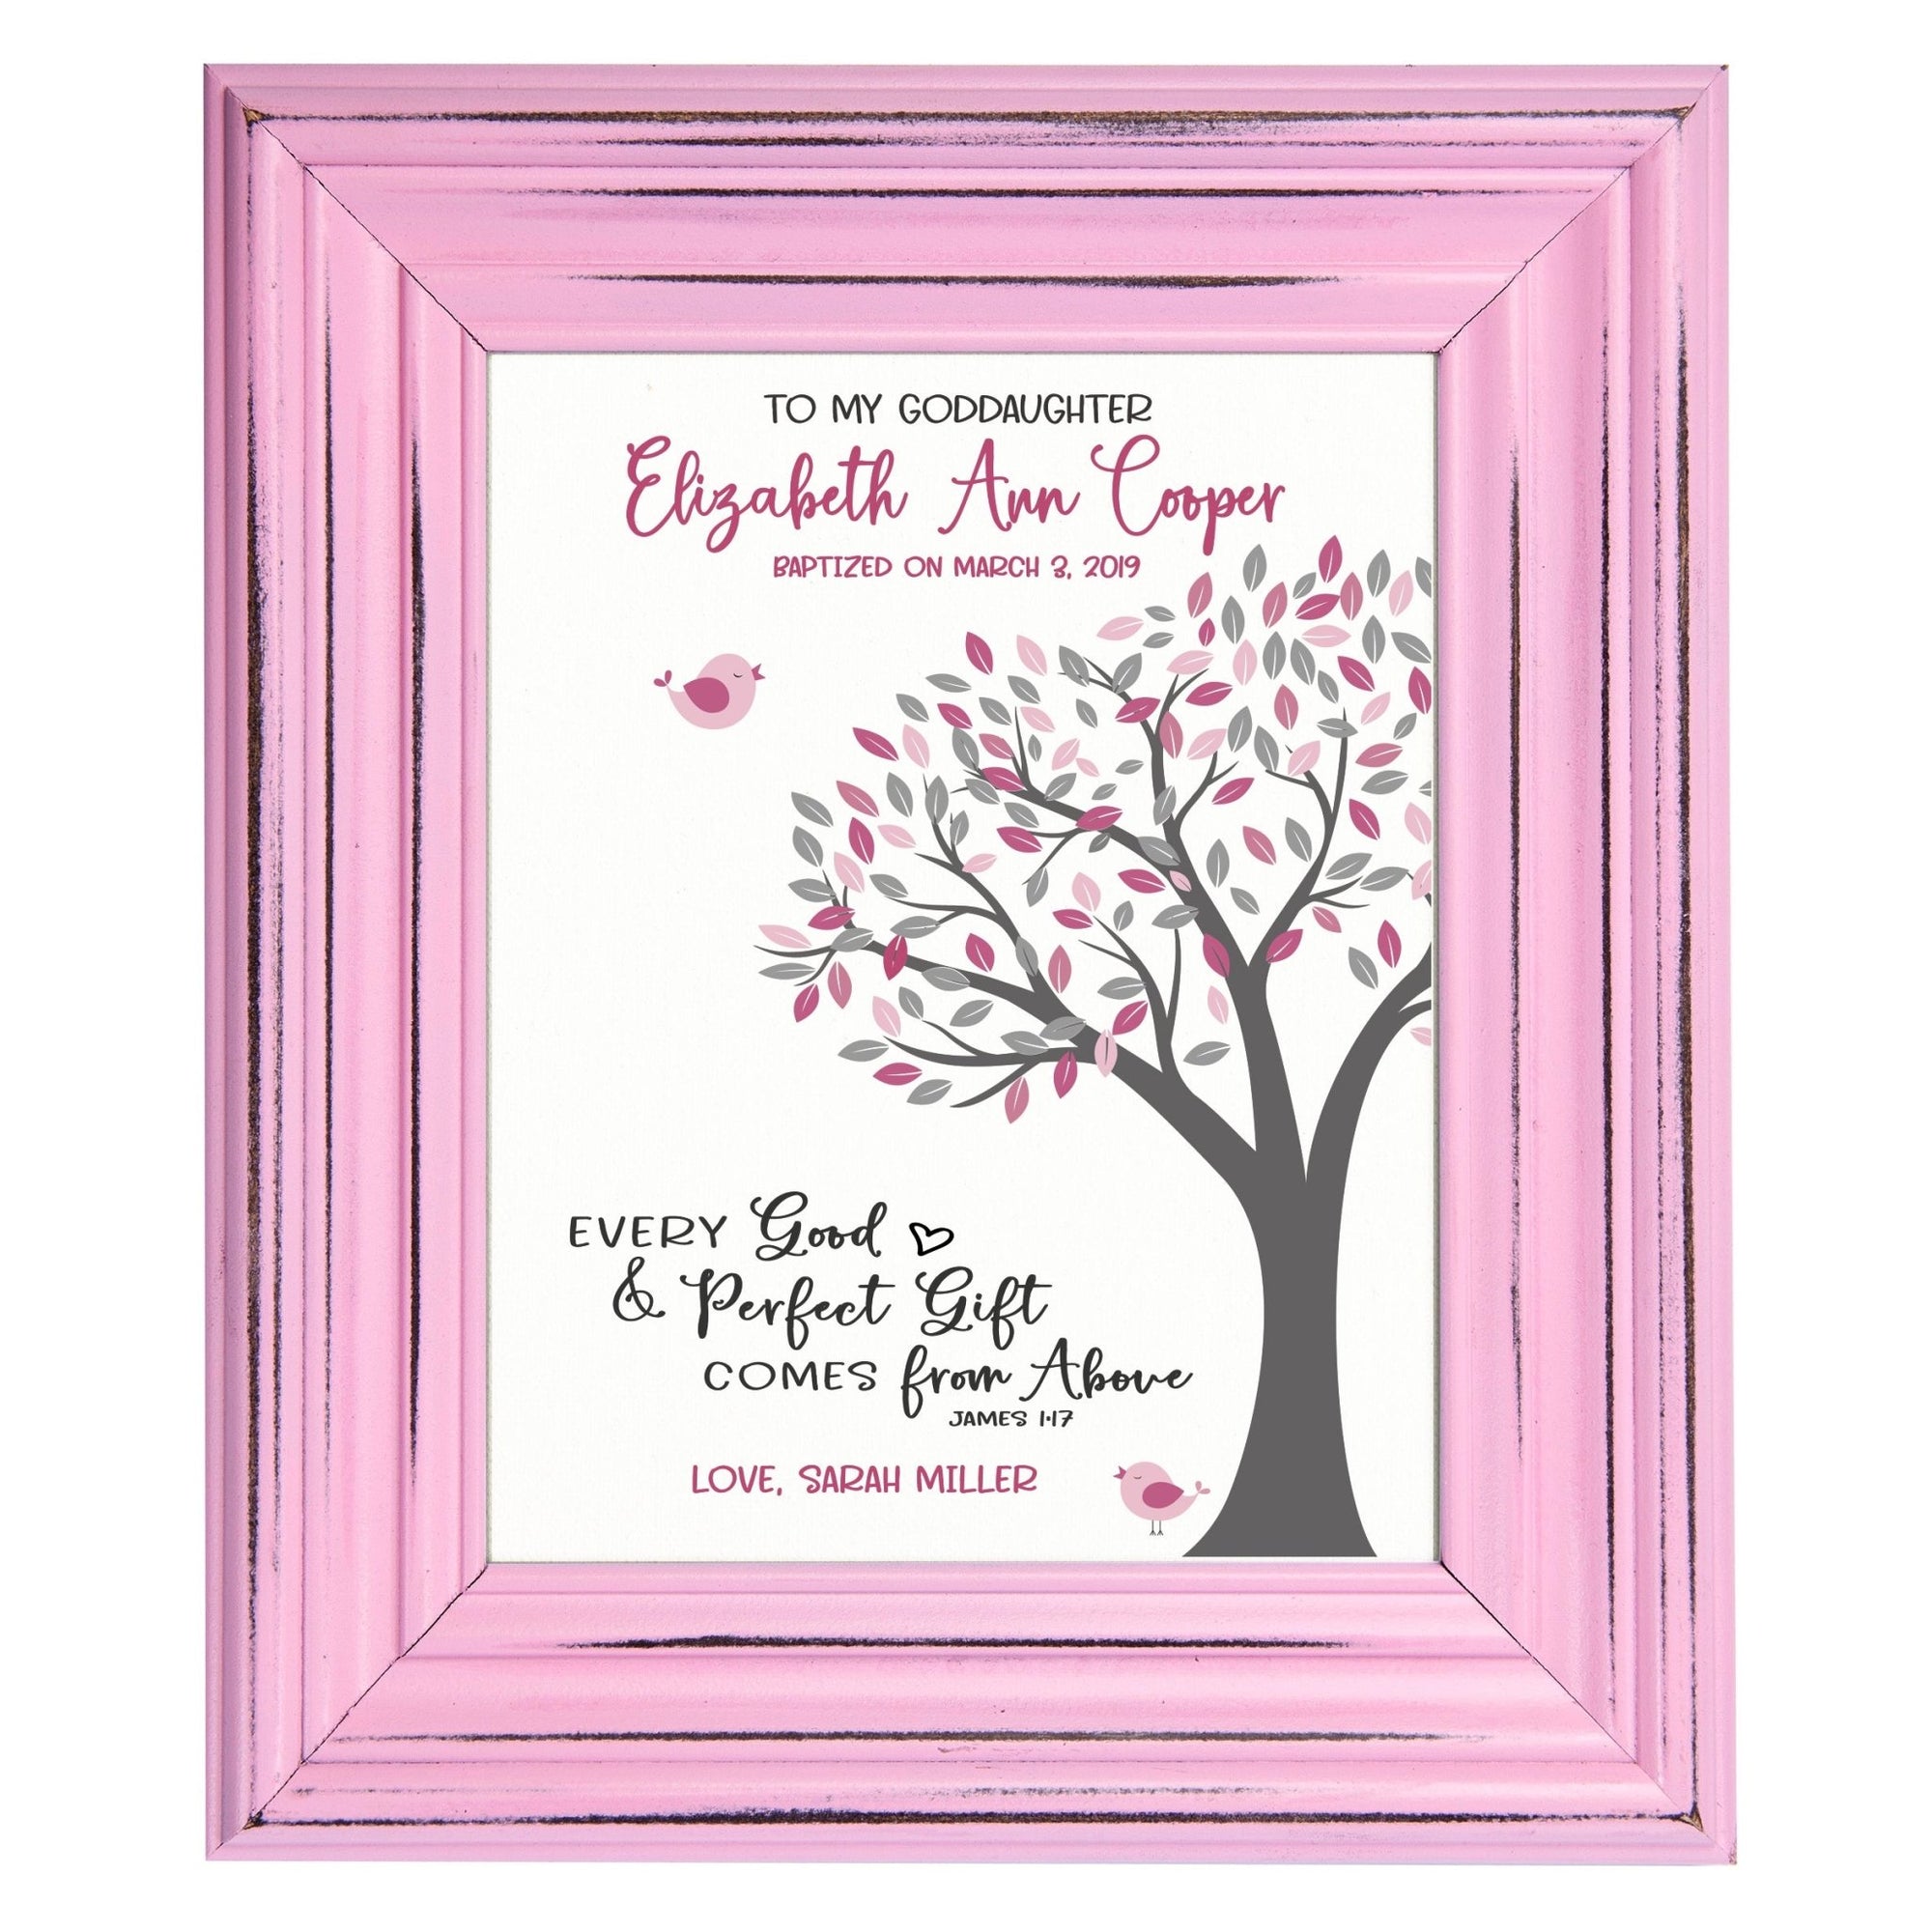 Personalized Godchild Framed Wall Signs - Every Good - LifeSong Milestones